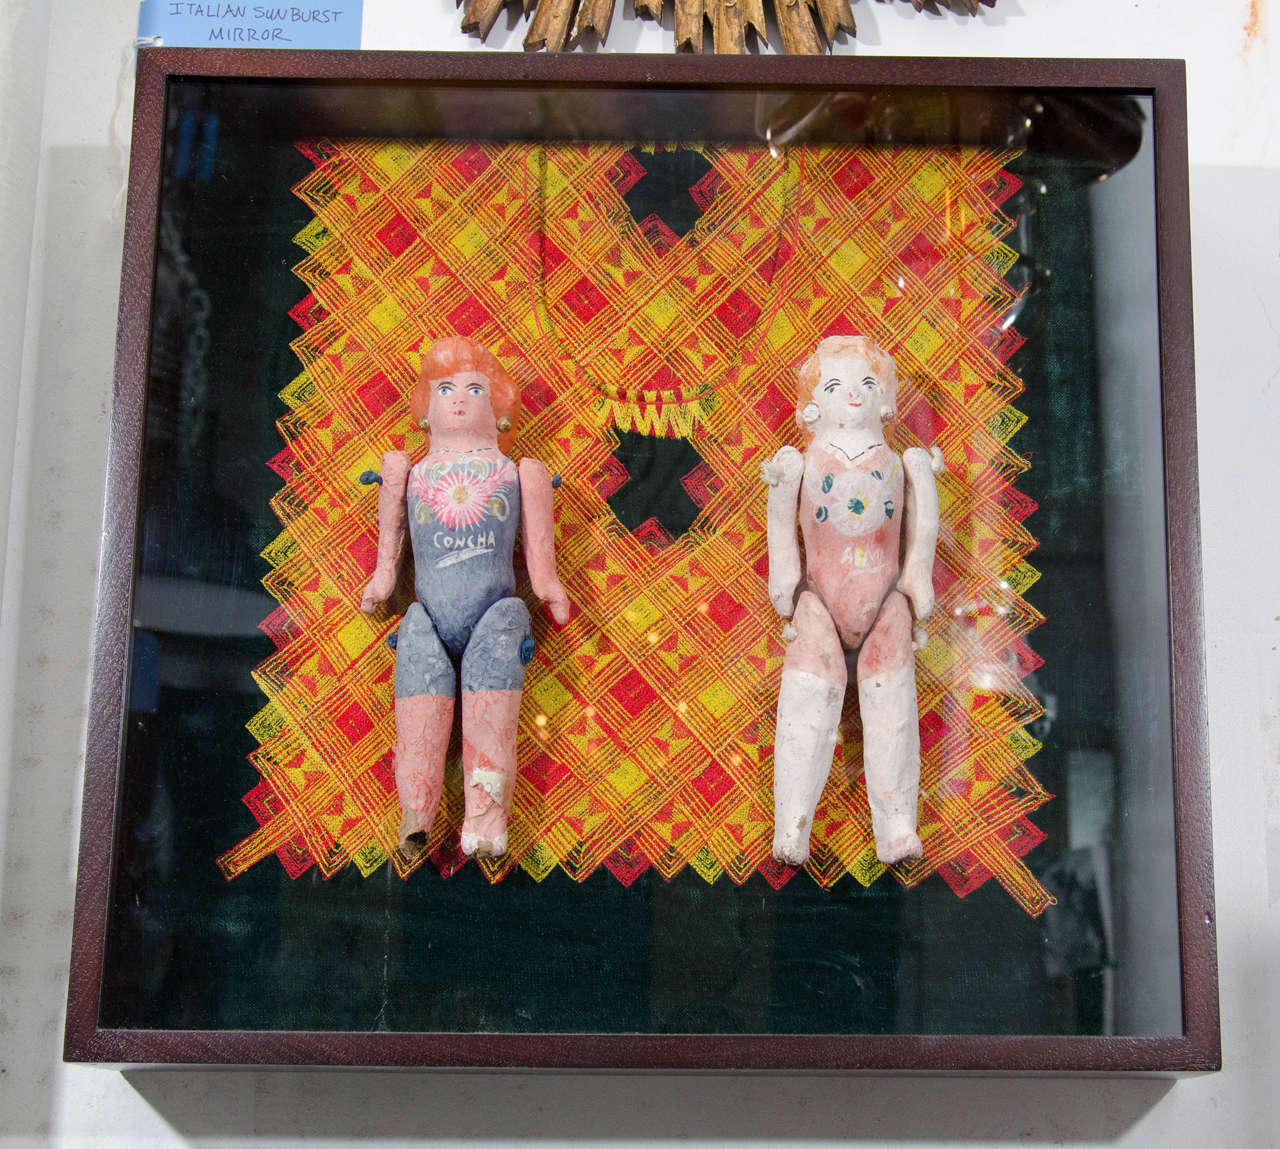 A pair of Mexican papier mâché dolls mounted on velvet huipil in a shadowbox.